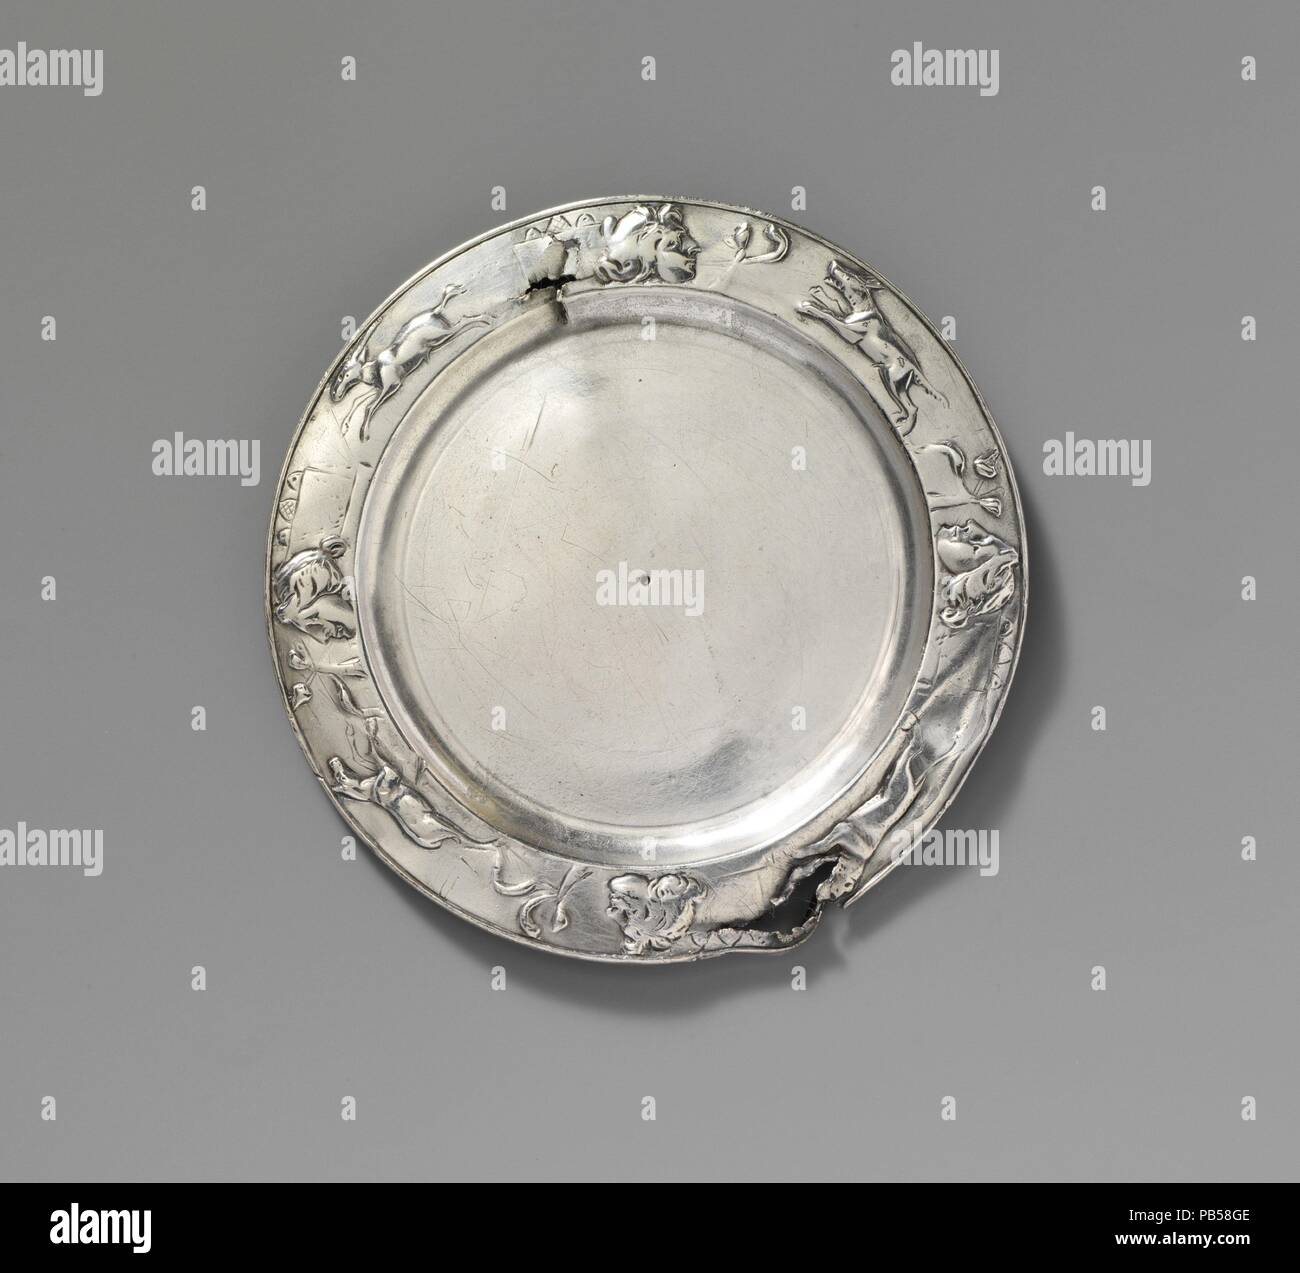 Silver plate. Culture: Roman. Dimensions: H. 1/16 in. (0.1 cm); diameter  5 in. (12.7 cm). Date: 1st-2nd century A.D..  The plate, originally part of a larger set of silver tableware, was clearly used over a prolonged period, since repeated polishing in antiquity has worn away the details of the rim decoration. On the underside are Latin inscriptions giving the names of two different owners. It was common for Romans to mark their valuable possessions in this way as a precaution against theft. The use of masks, symbols, and animals as decoration seen here was popular throughout the Imperial per Stock Photo